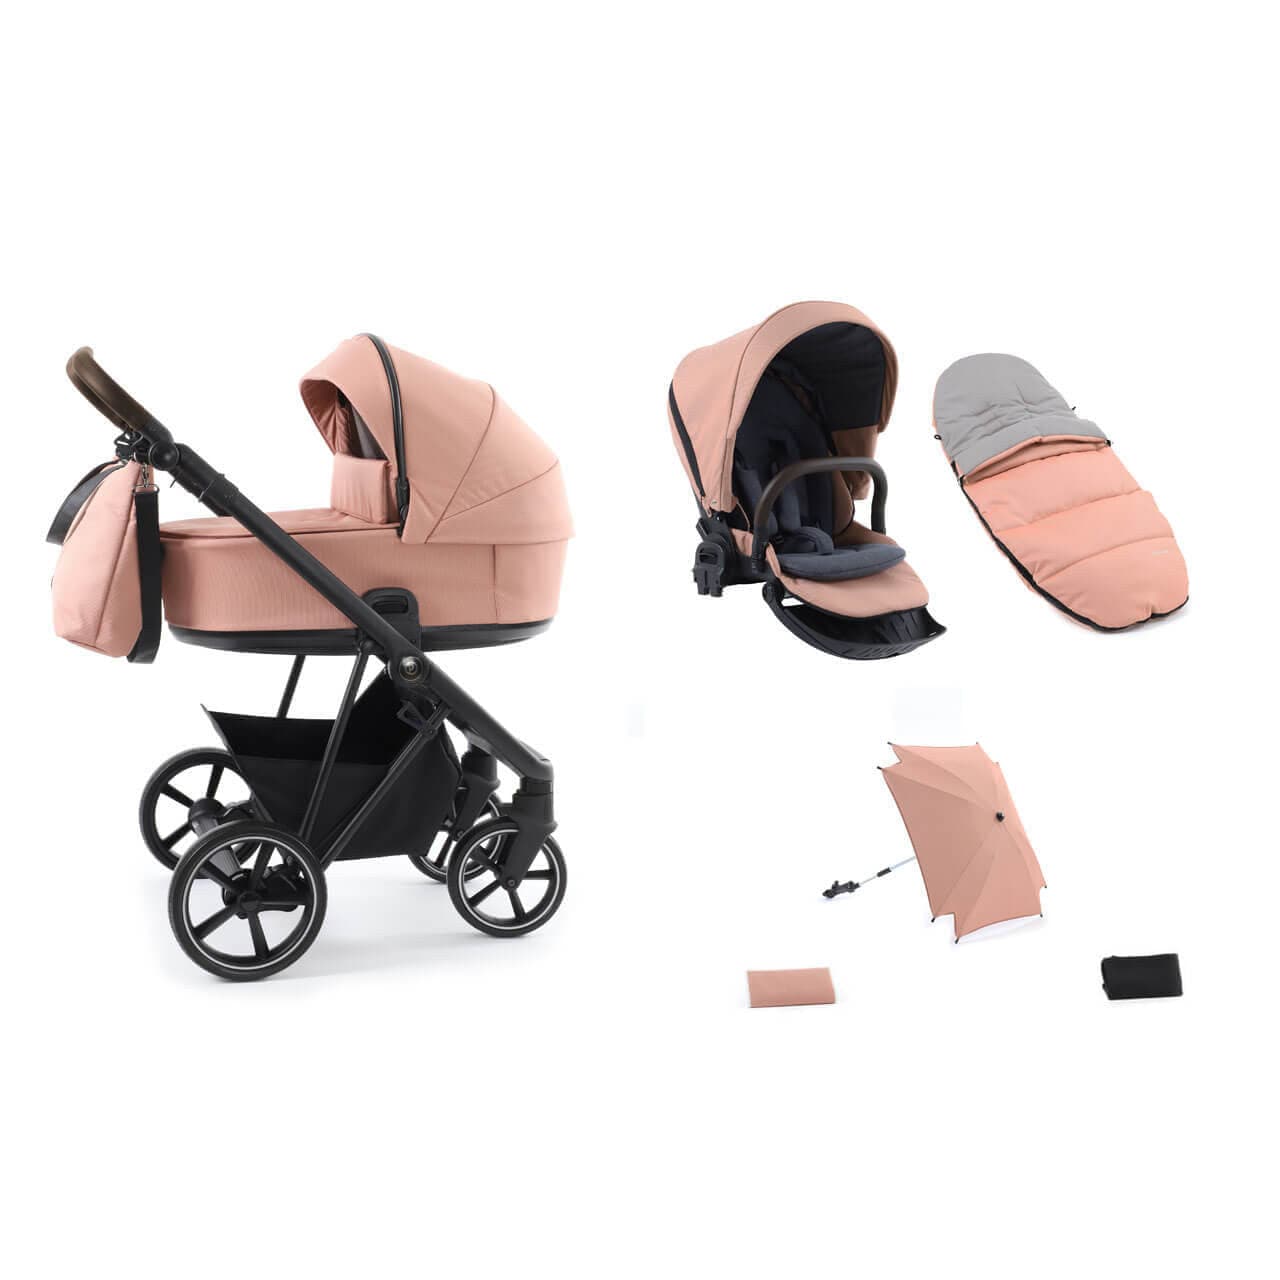 Babystyle Prestige Vogue 8 Piece Travel System Bundle - Coral - For Your Little One